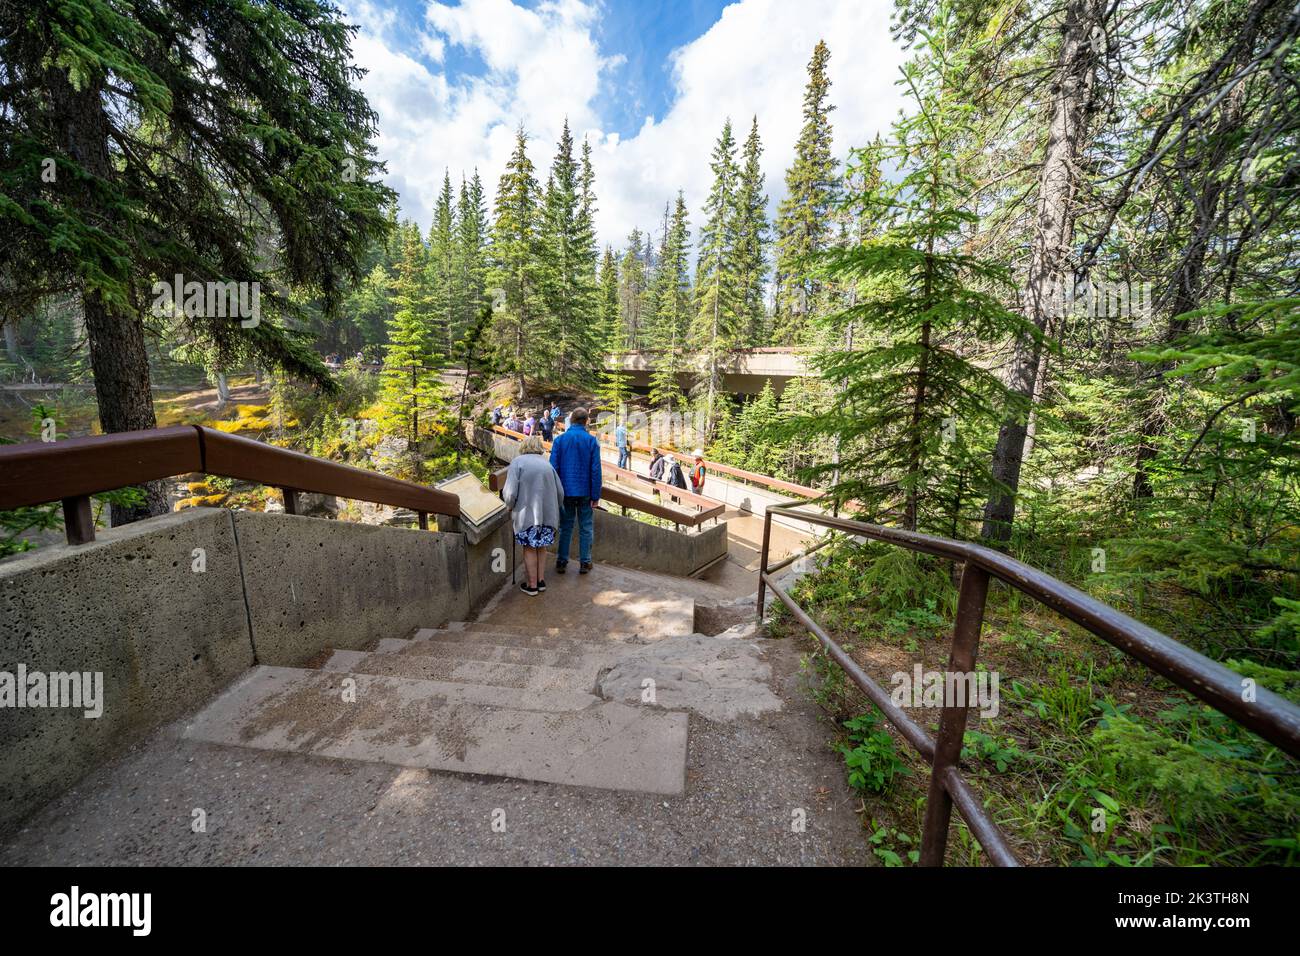 Jasper, Alberta, Canada - July 13, 2022: Tourists walk along the network of stairs to see Athabasca Falls waterfall along the Icefields Parkway in Jas Stock Photo